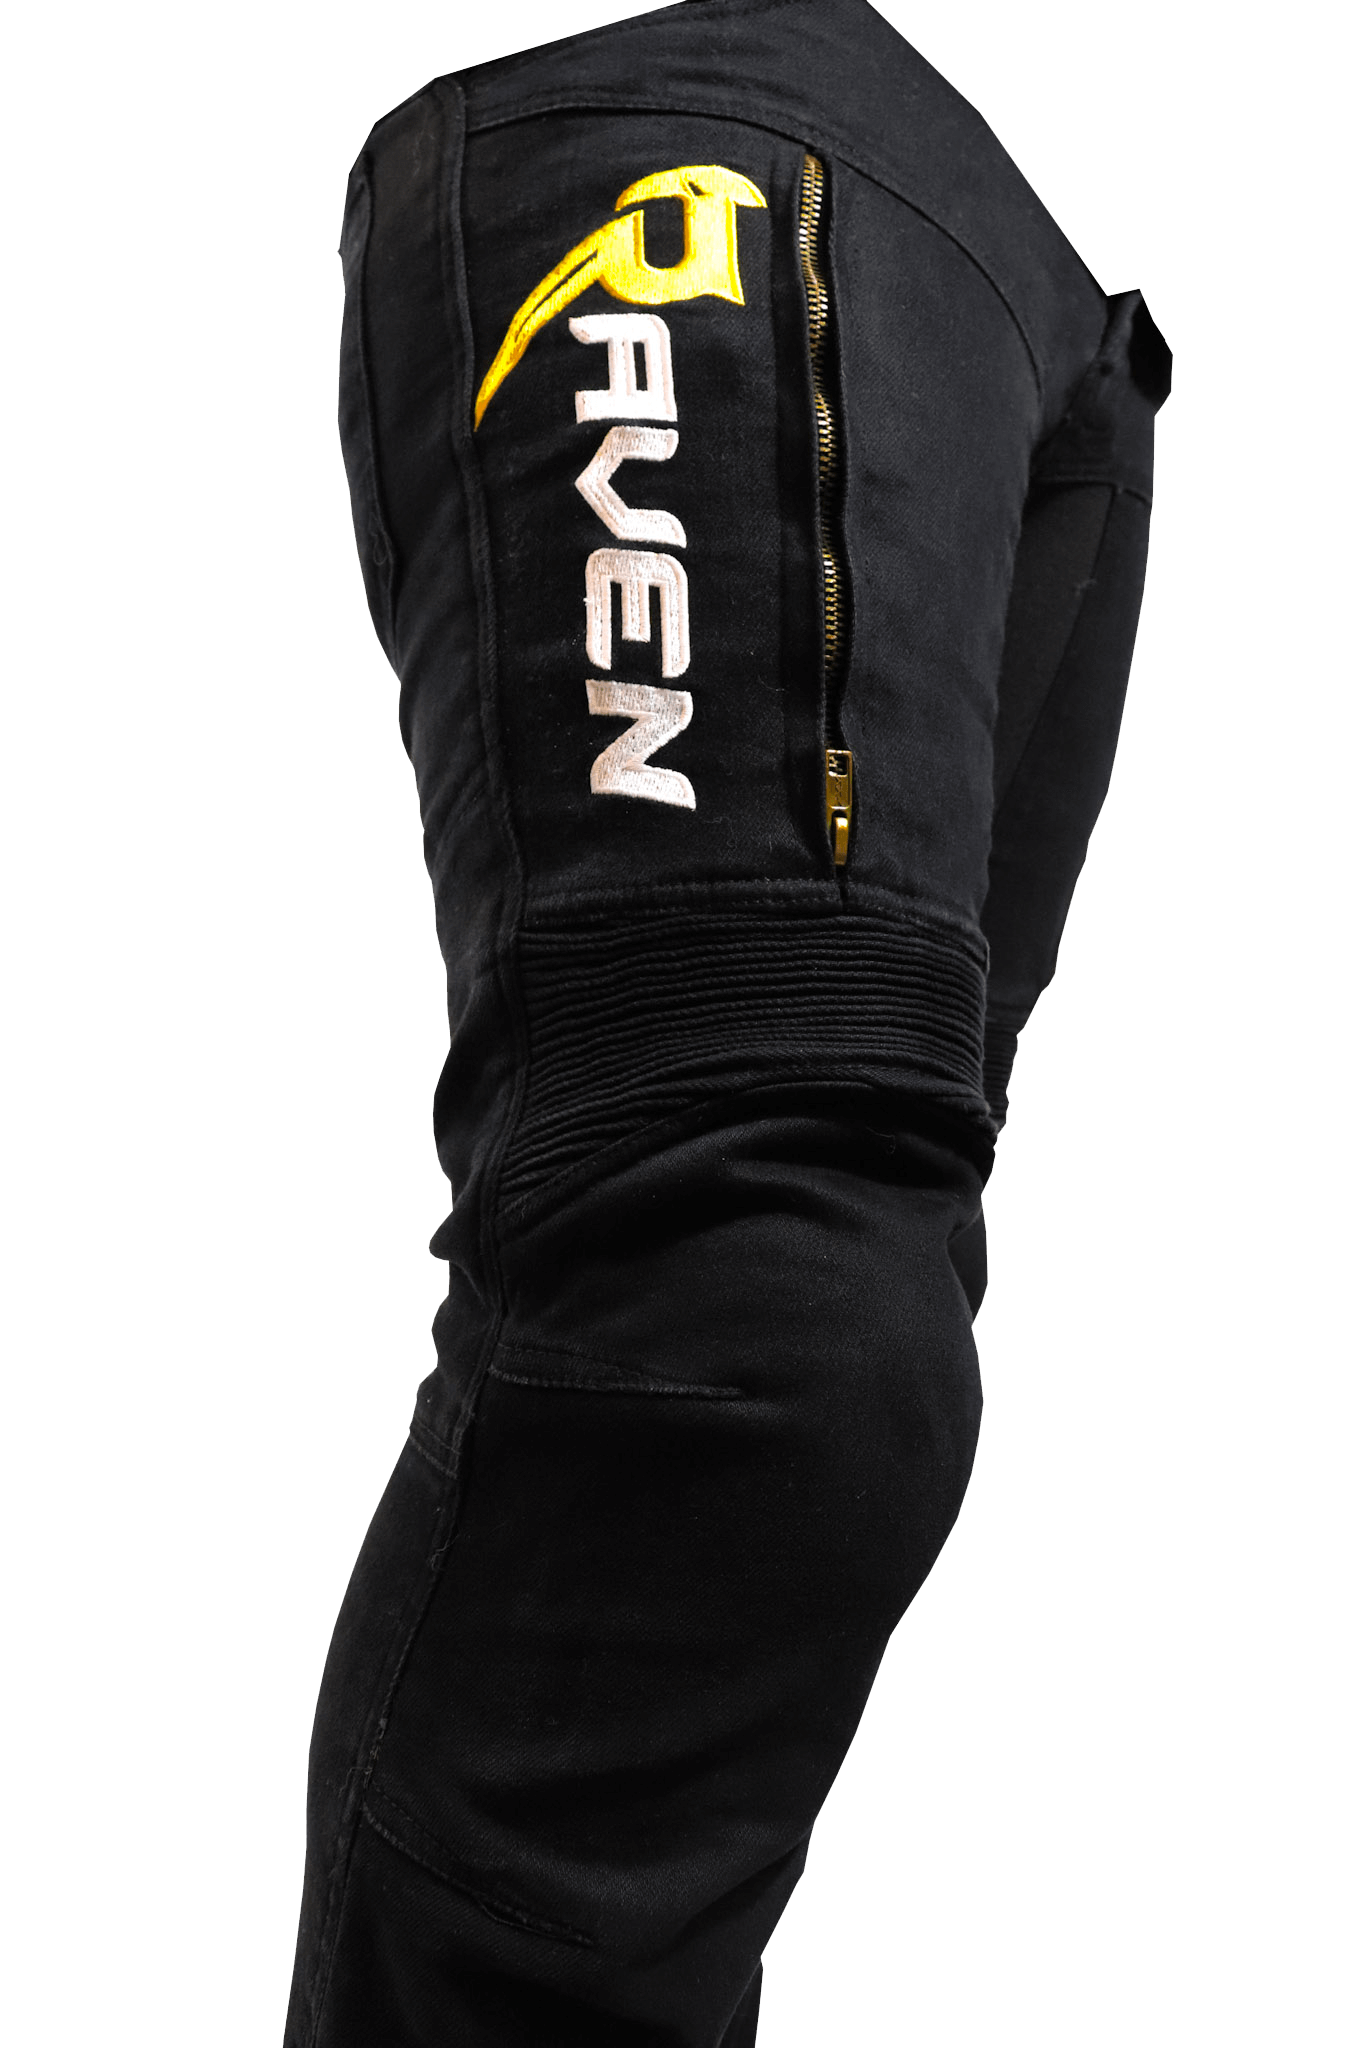 RAVEN Moto ONYX Gold Armored Motorcycle Protective Jeans with CE Level 2 Armor Black Slim Fit Denim